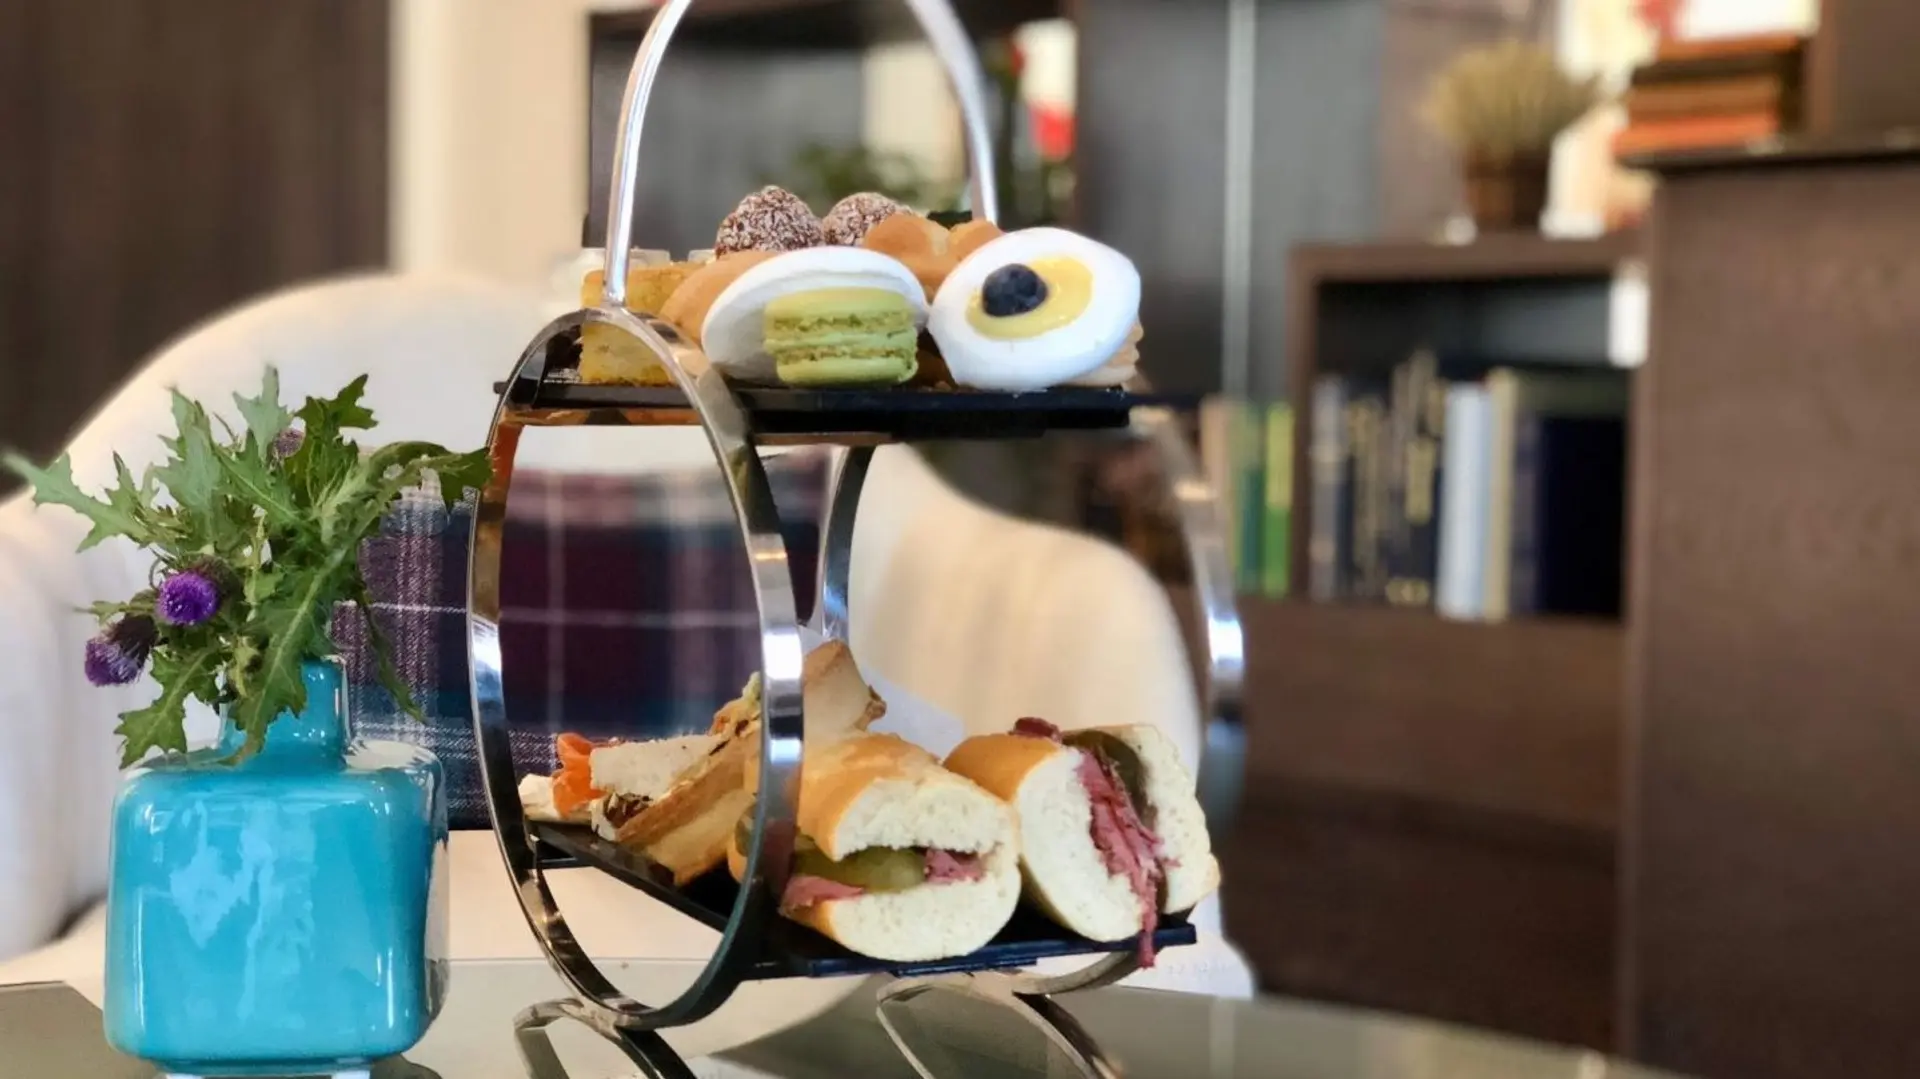 Hotel review Restaurants & Bars' - The Glasshouse, Autograph Collection - 4